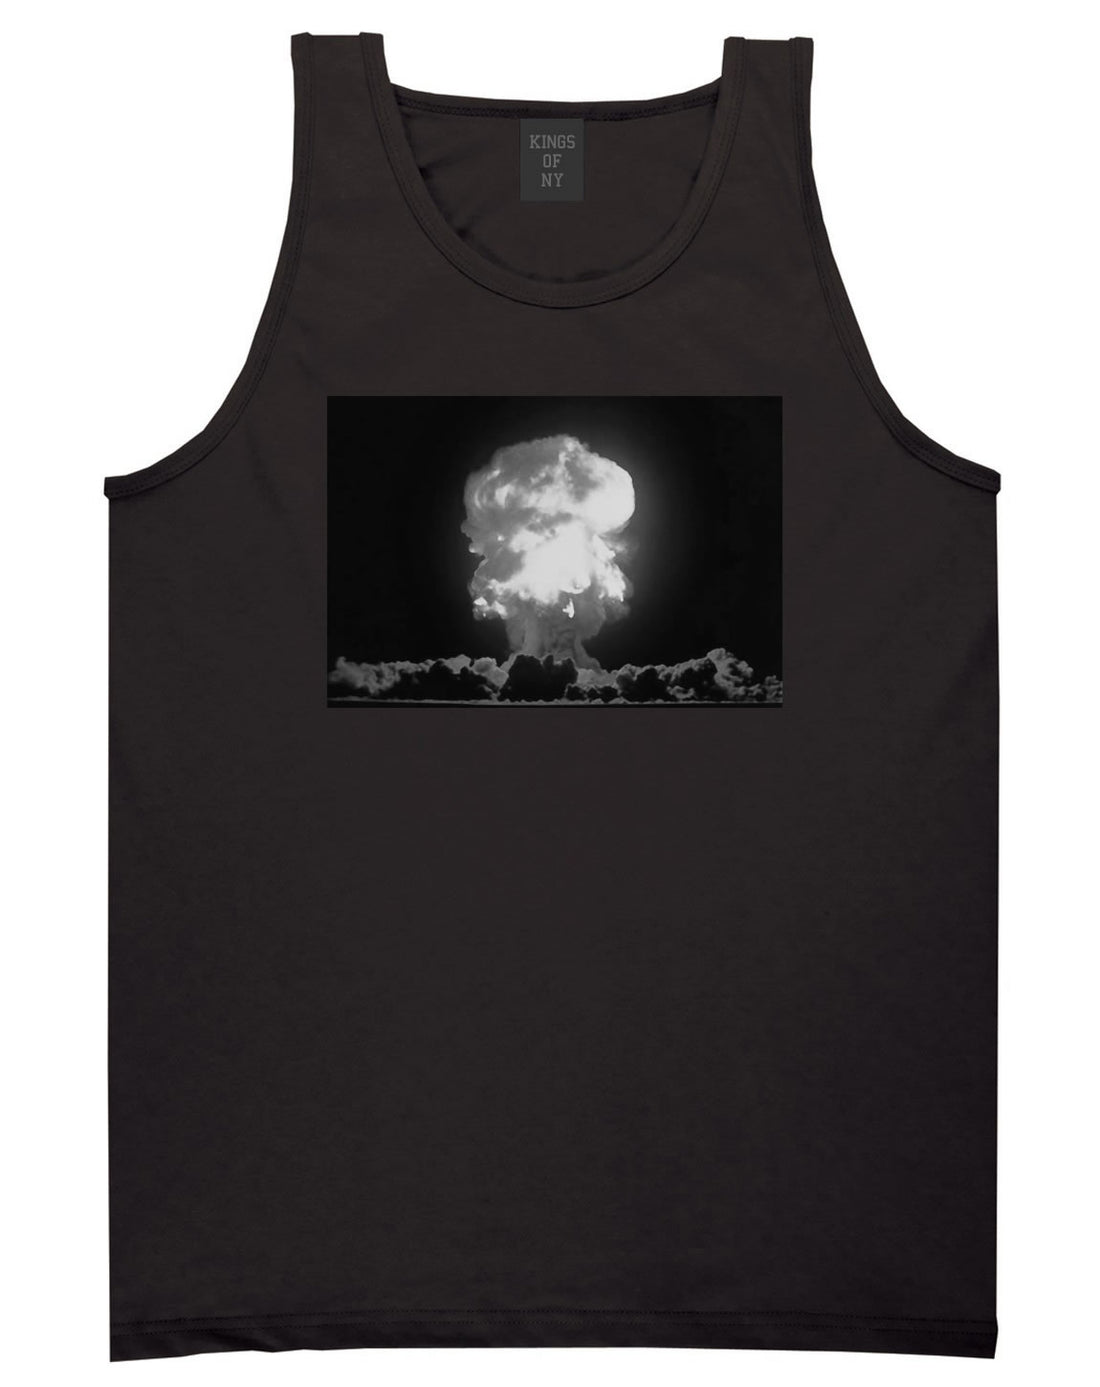 Explosion Nuclear Bomb Cloud Tank Top in Black By Kings Of NY